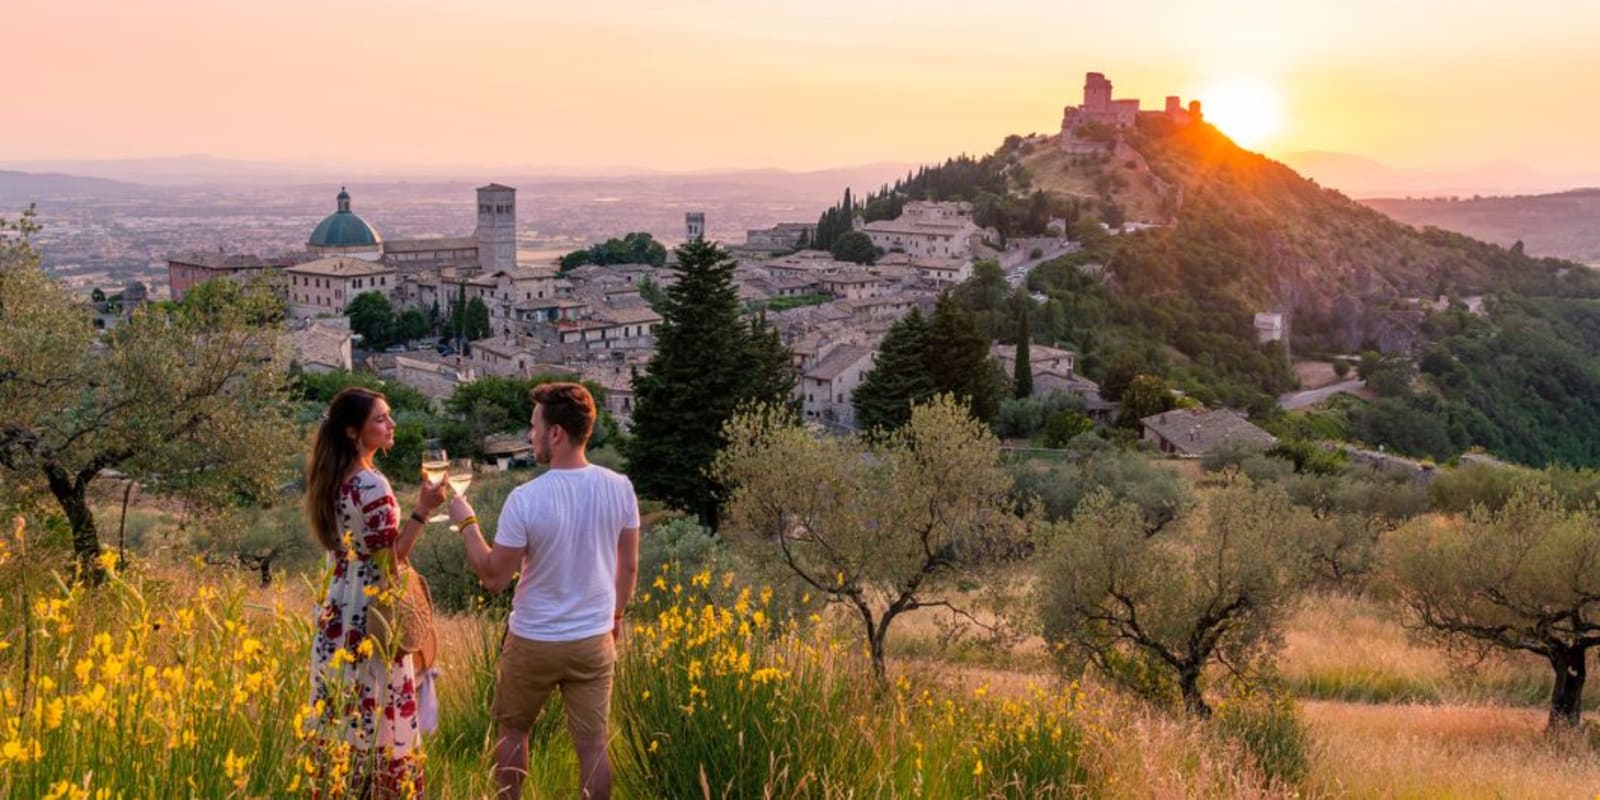 A couple drinking a glass of wine together on a hillside as the sun sets in the background